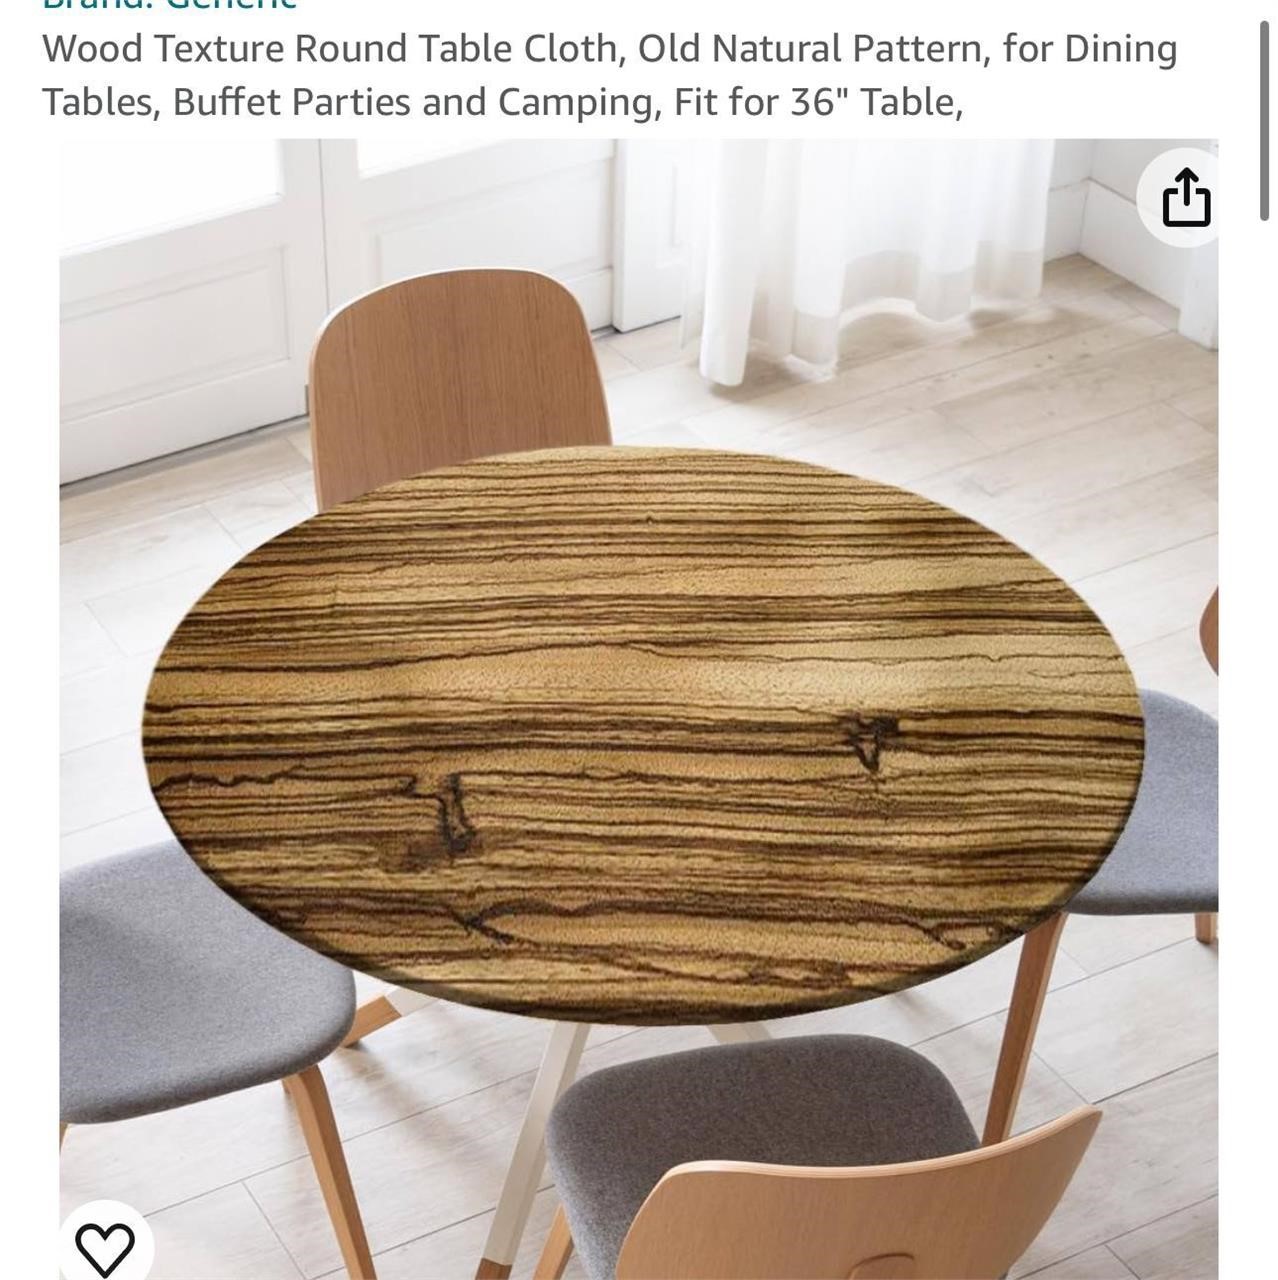 Wood Texture Round Table Cloth